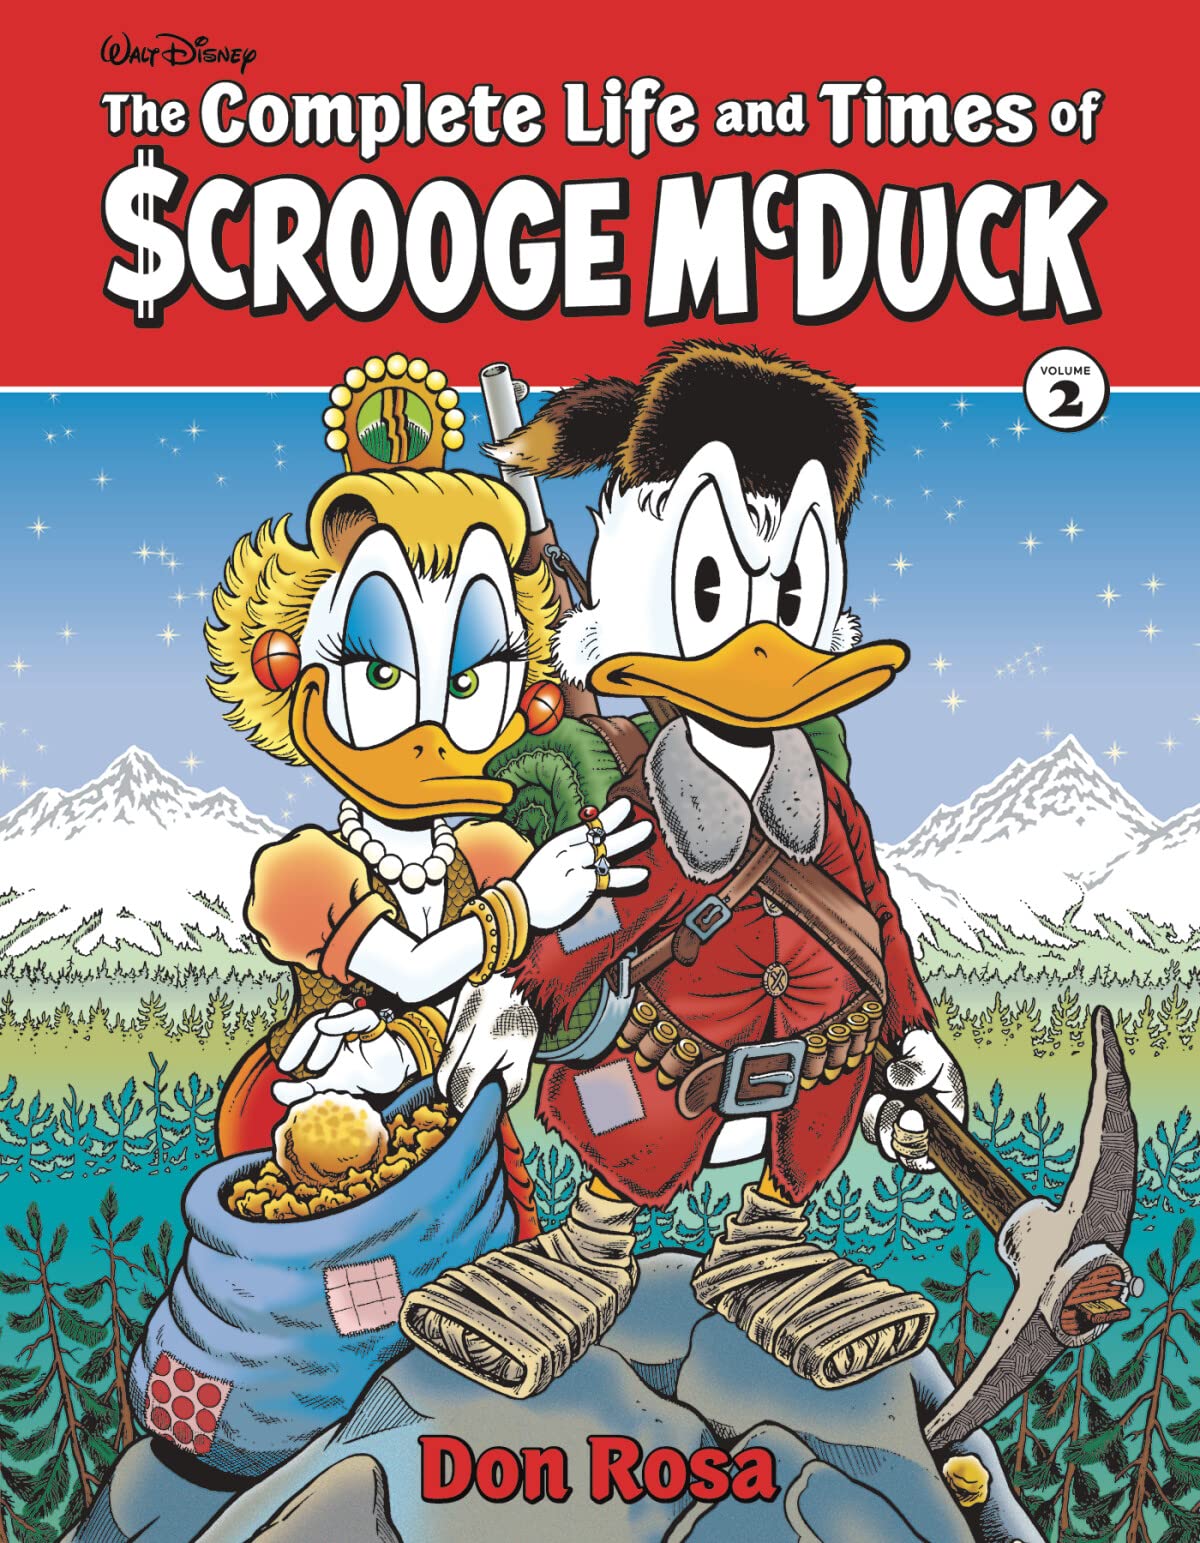 The Complete Life and Times of Scrooge McDuck Vol. 2 (The Don Rosa Library)